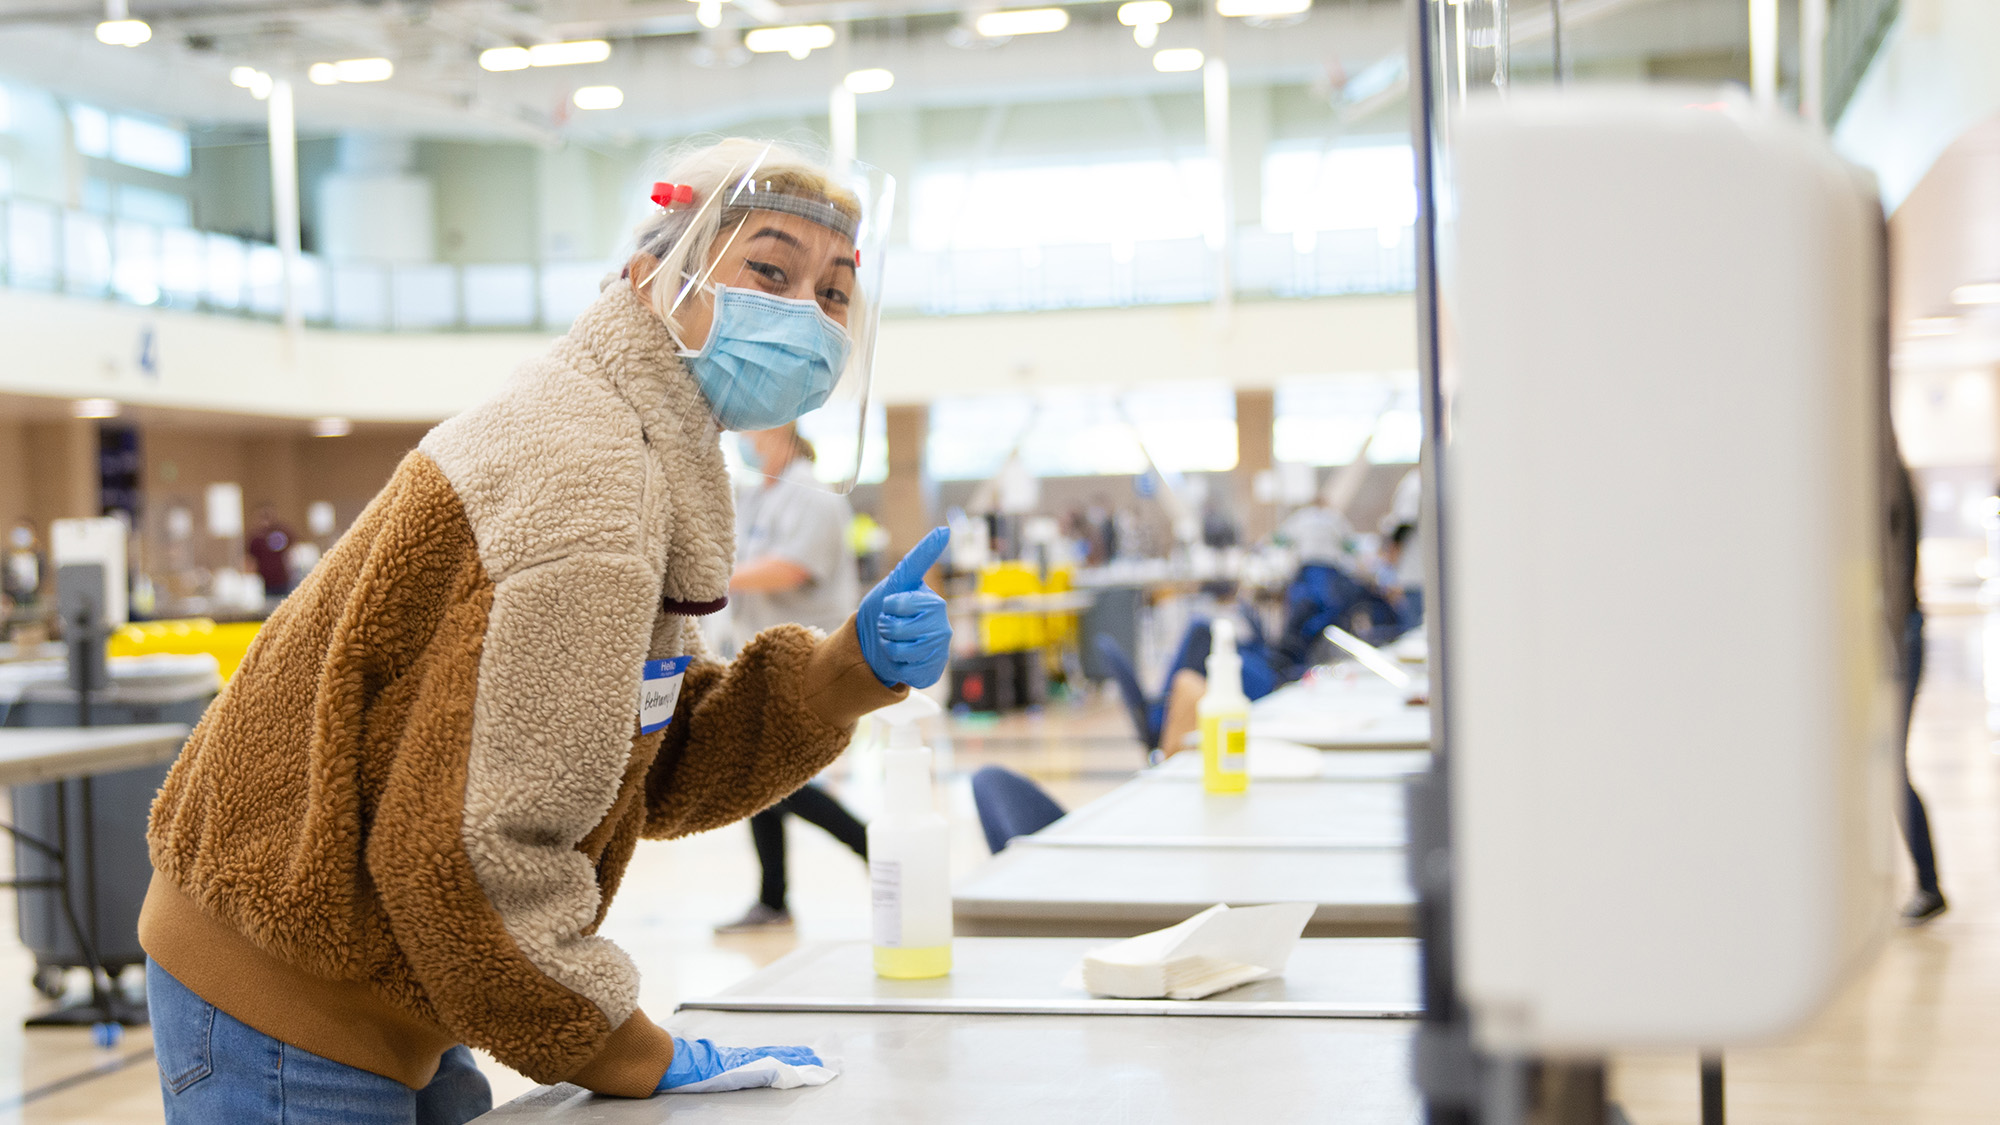 Worker in face mask cleans table while giving thumbs-up.